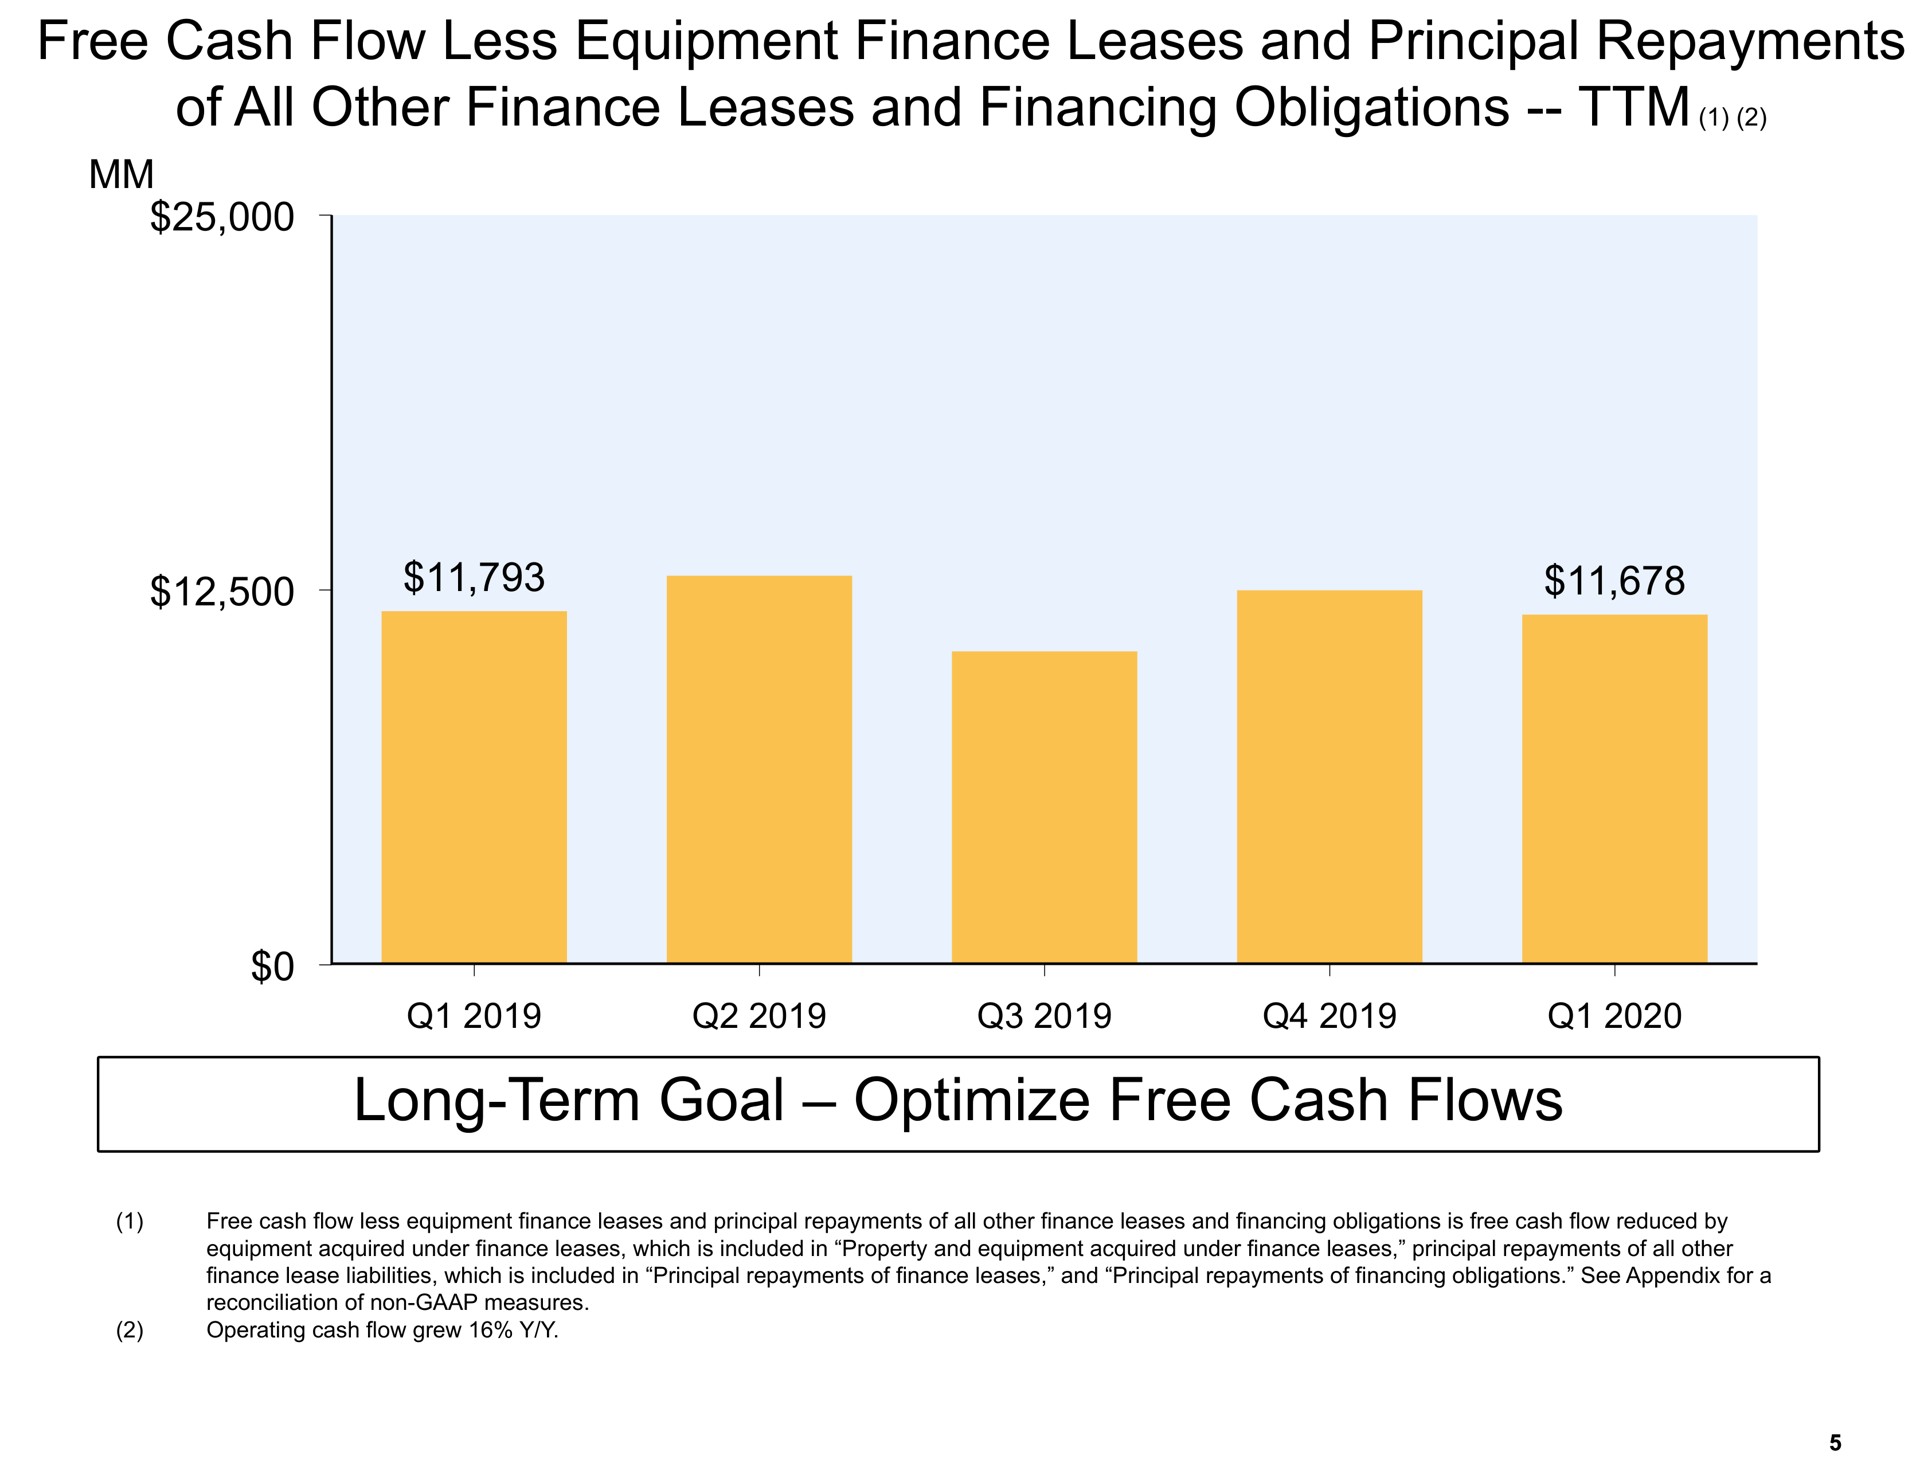 long term goal optimize free cash flows of all other finance leases and financing obligations | Amazon